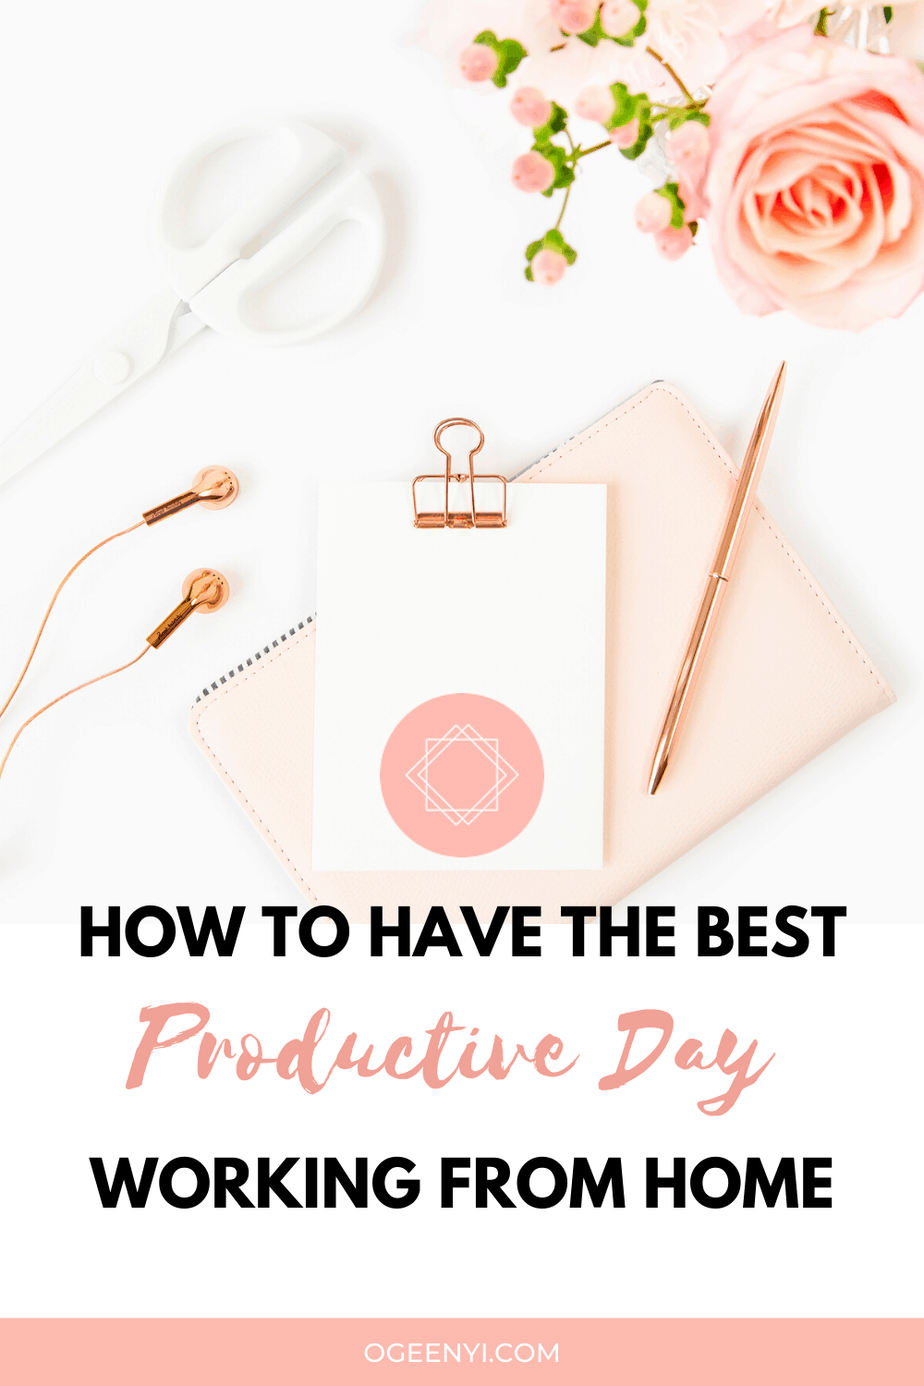 How To Have The Best Productive Day Working From Home